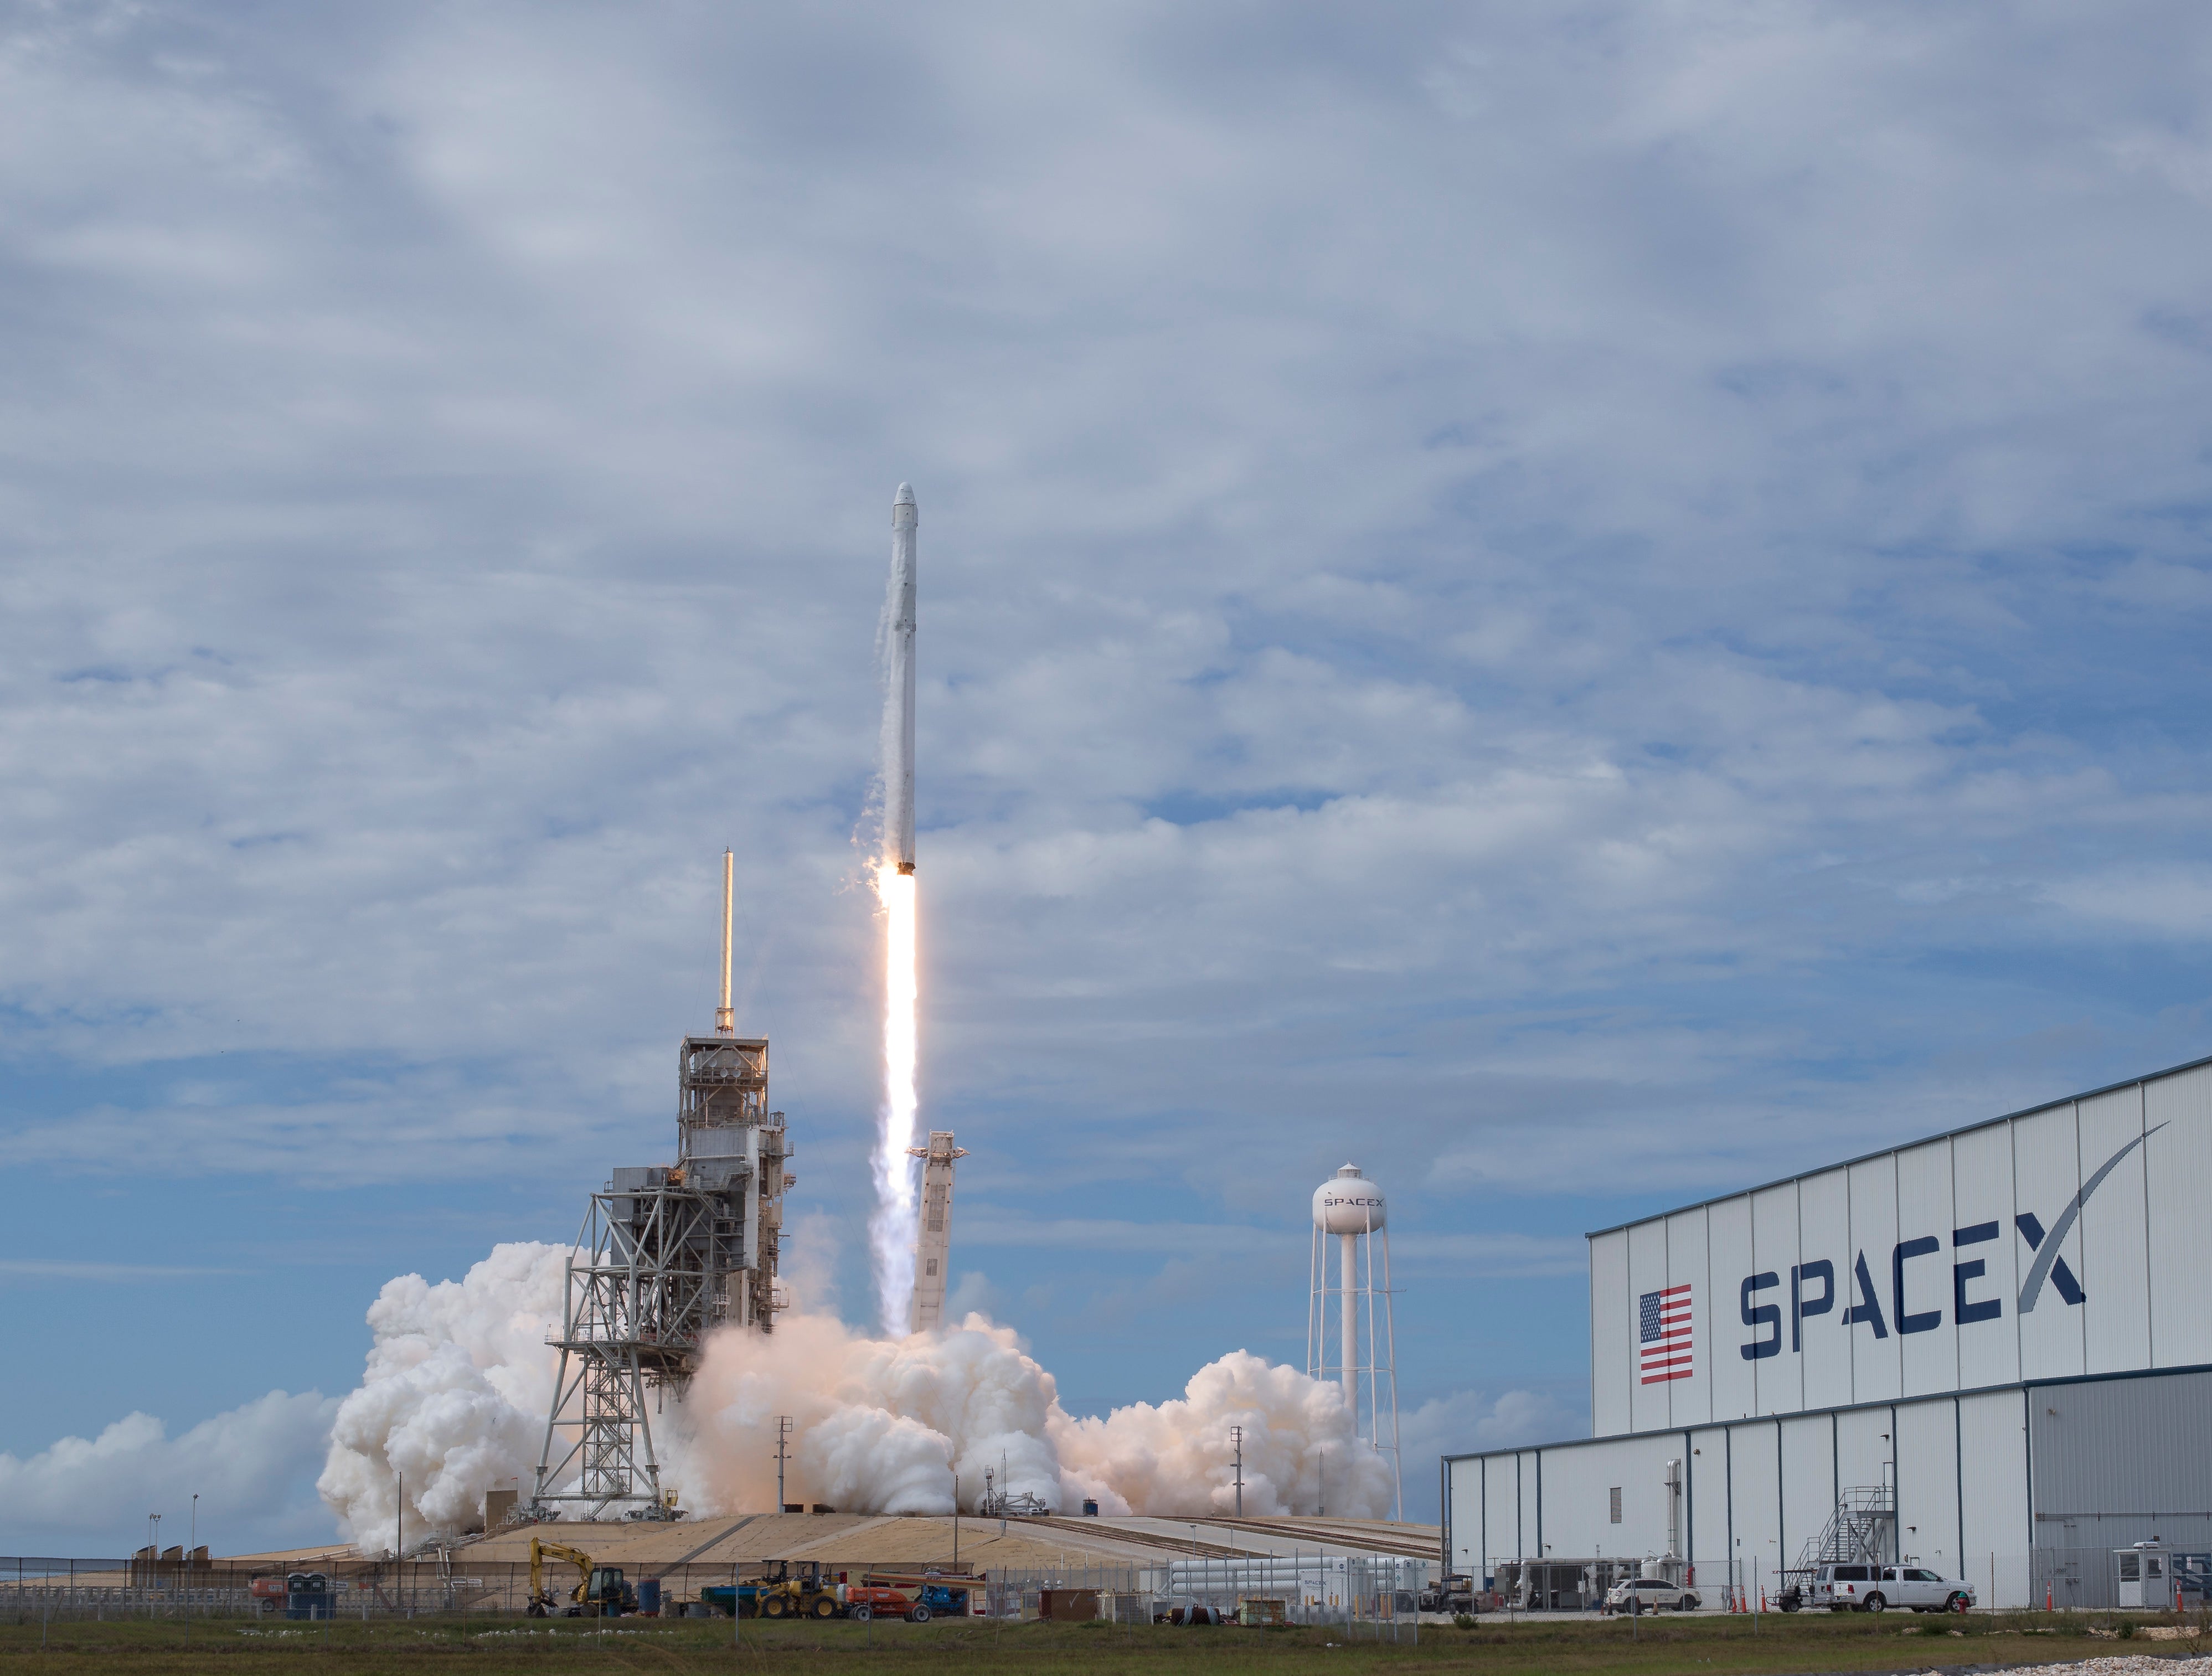 A SpaceX Falcon 9 rocket lifts off from Nasa’s Kennedy Space Center in June, 2017.